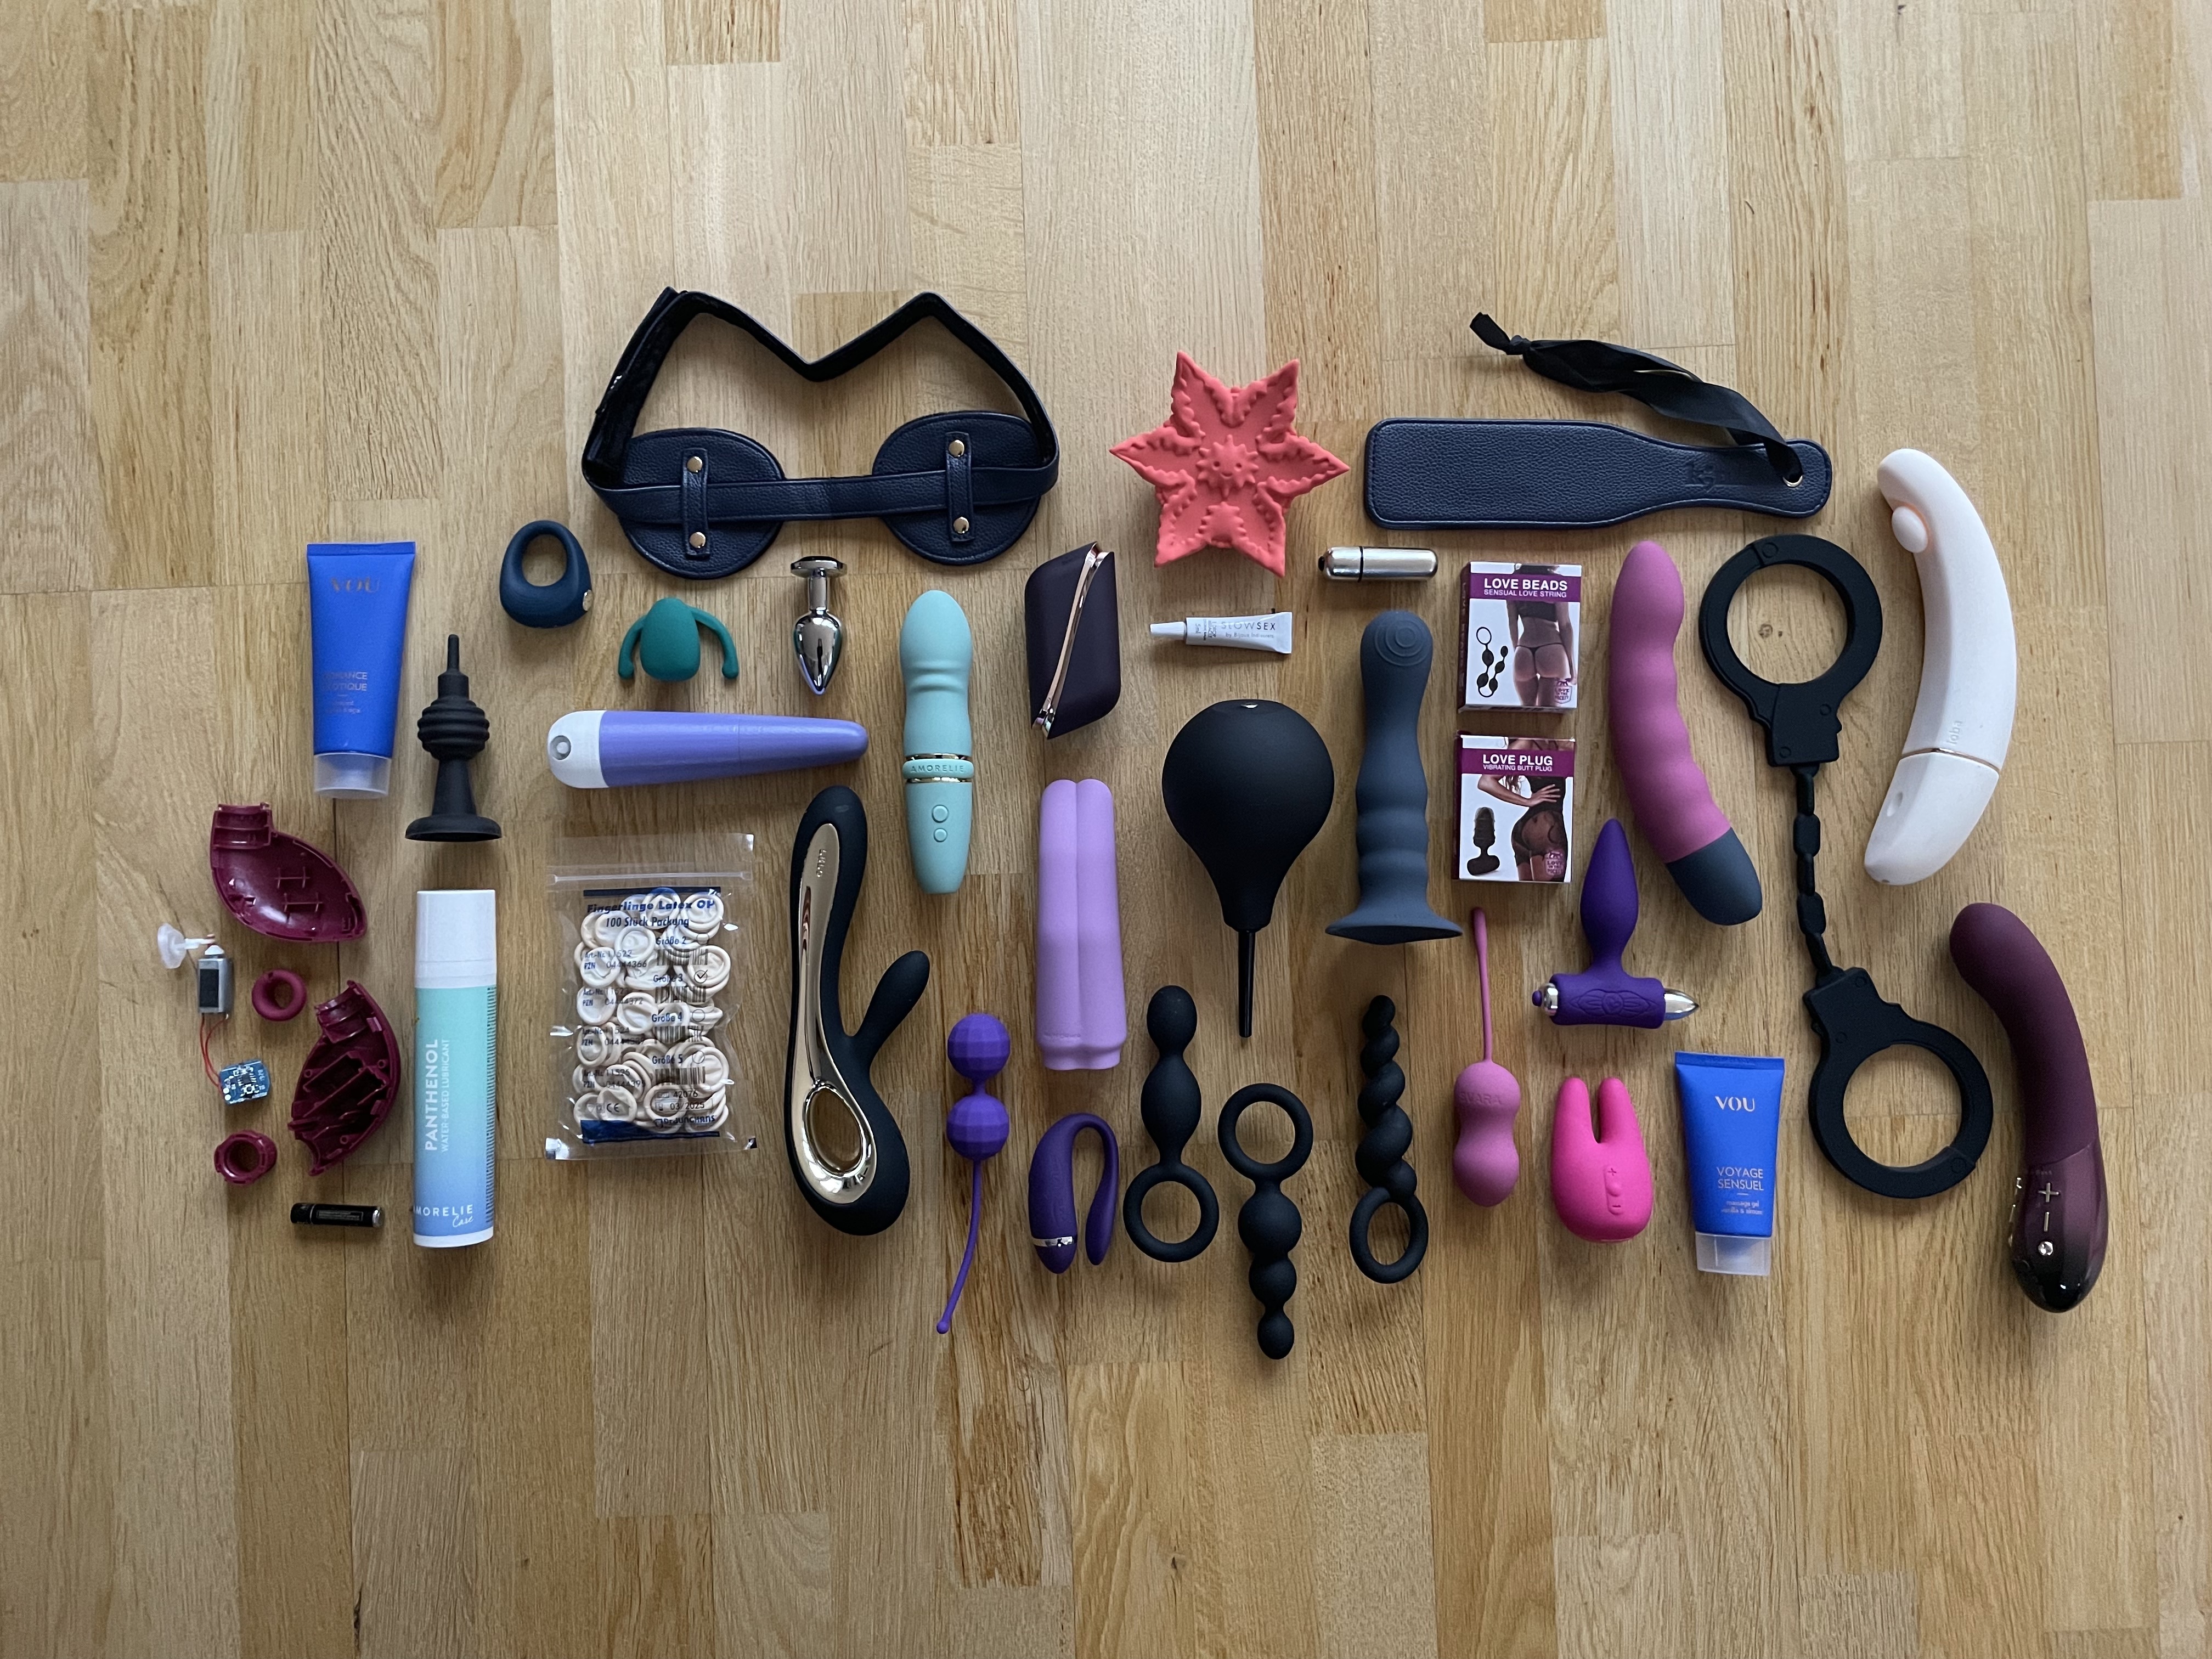 My Sex Toy Collection as of January 2022 Carolyn Stransky image